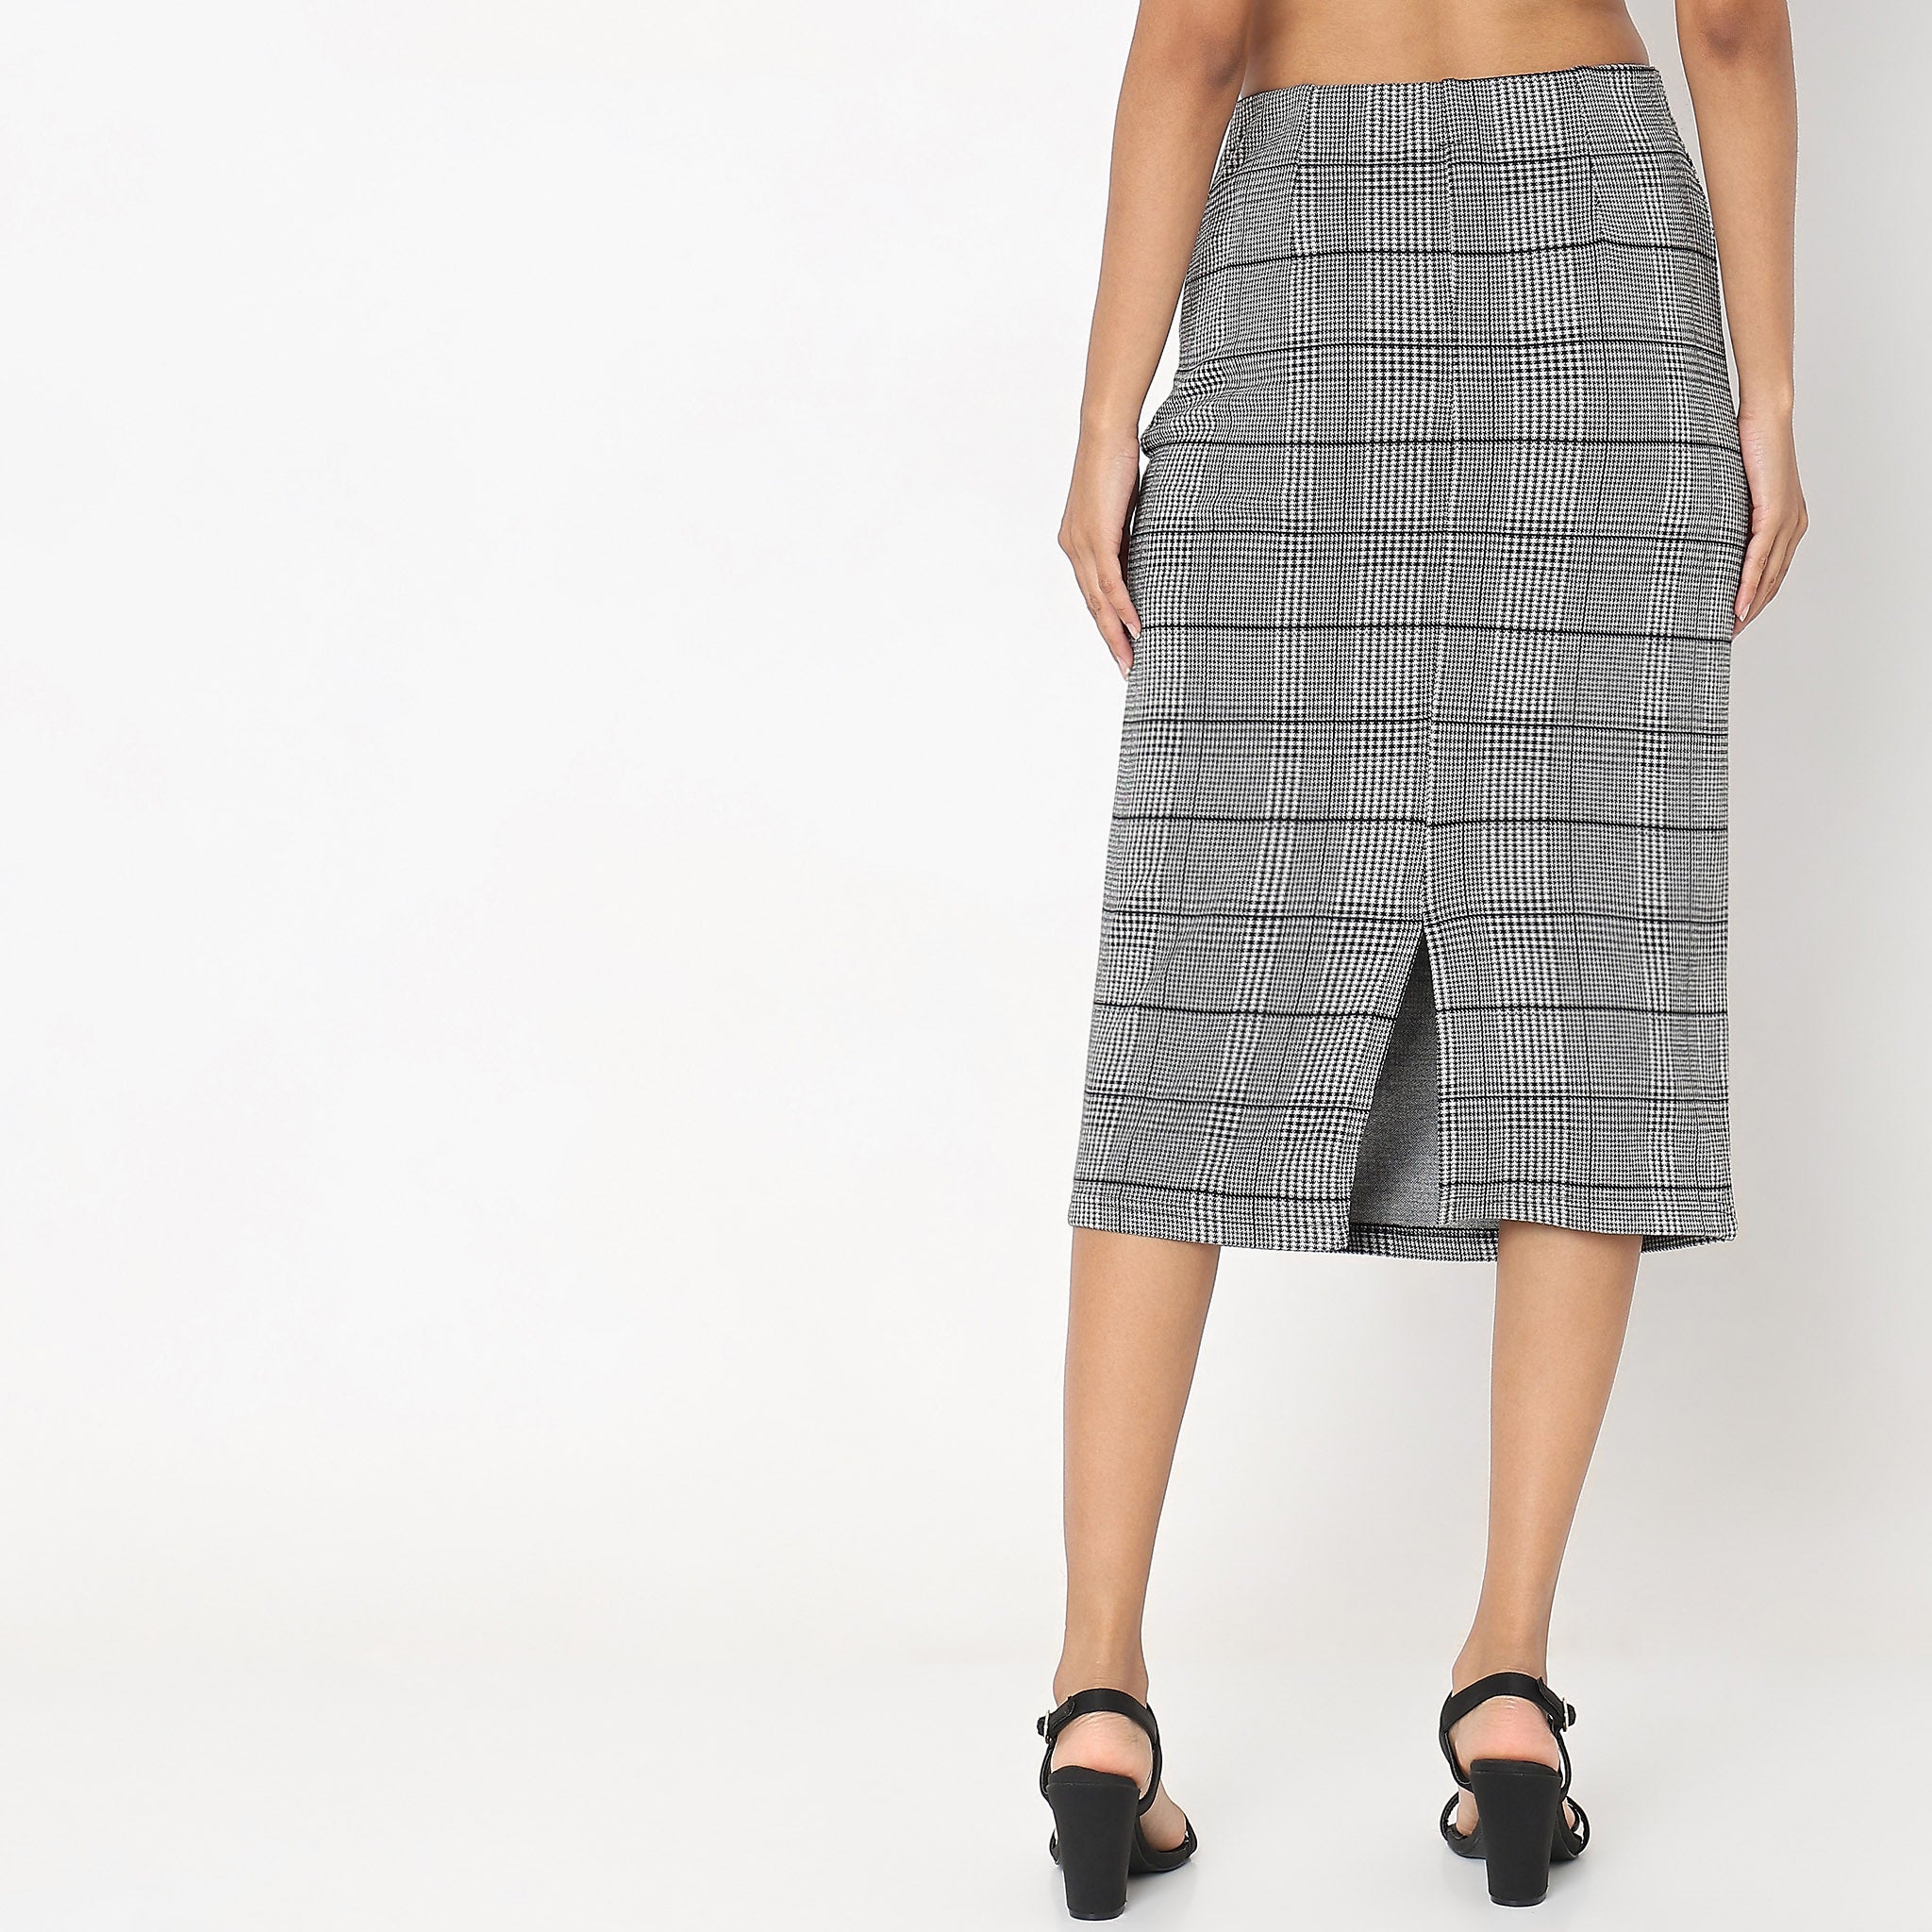 Slim Fit Houndstooth High Rise Skirts